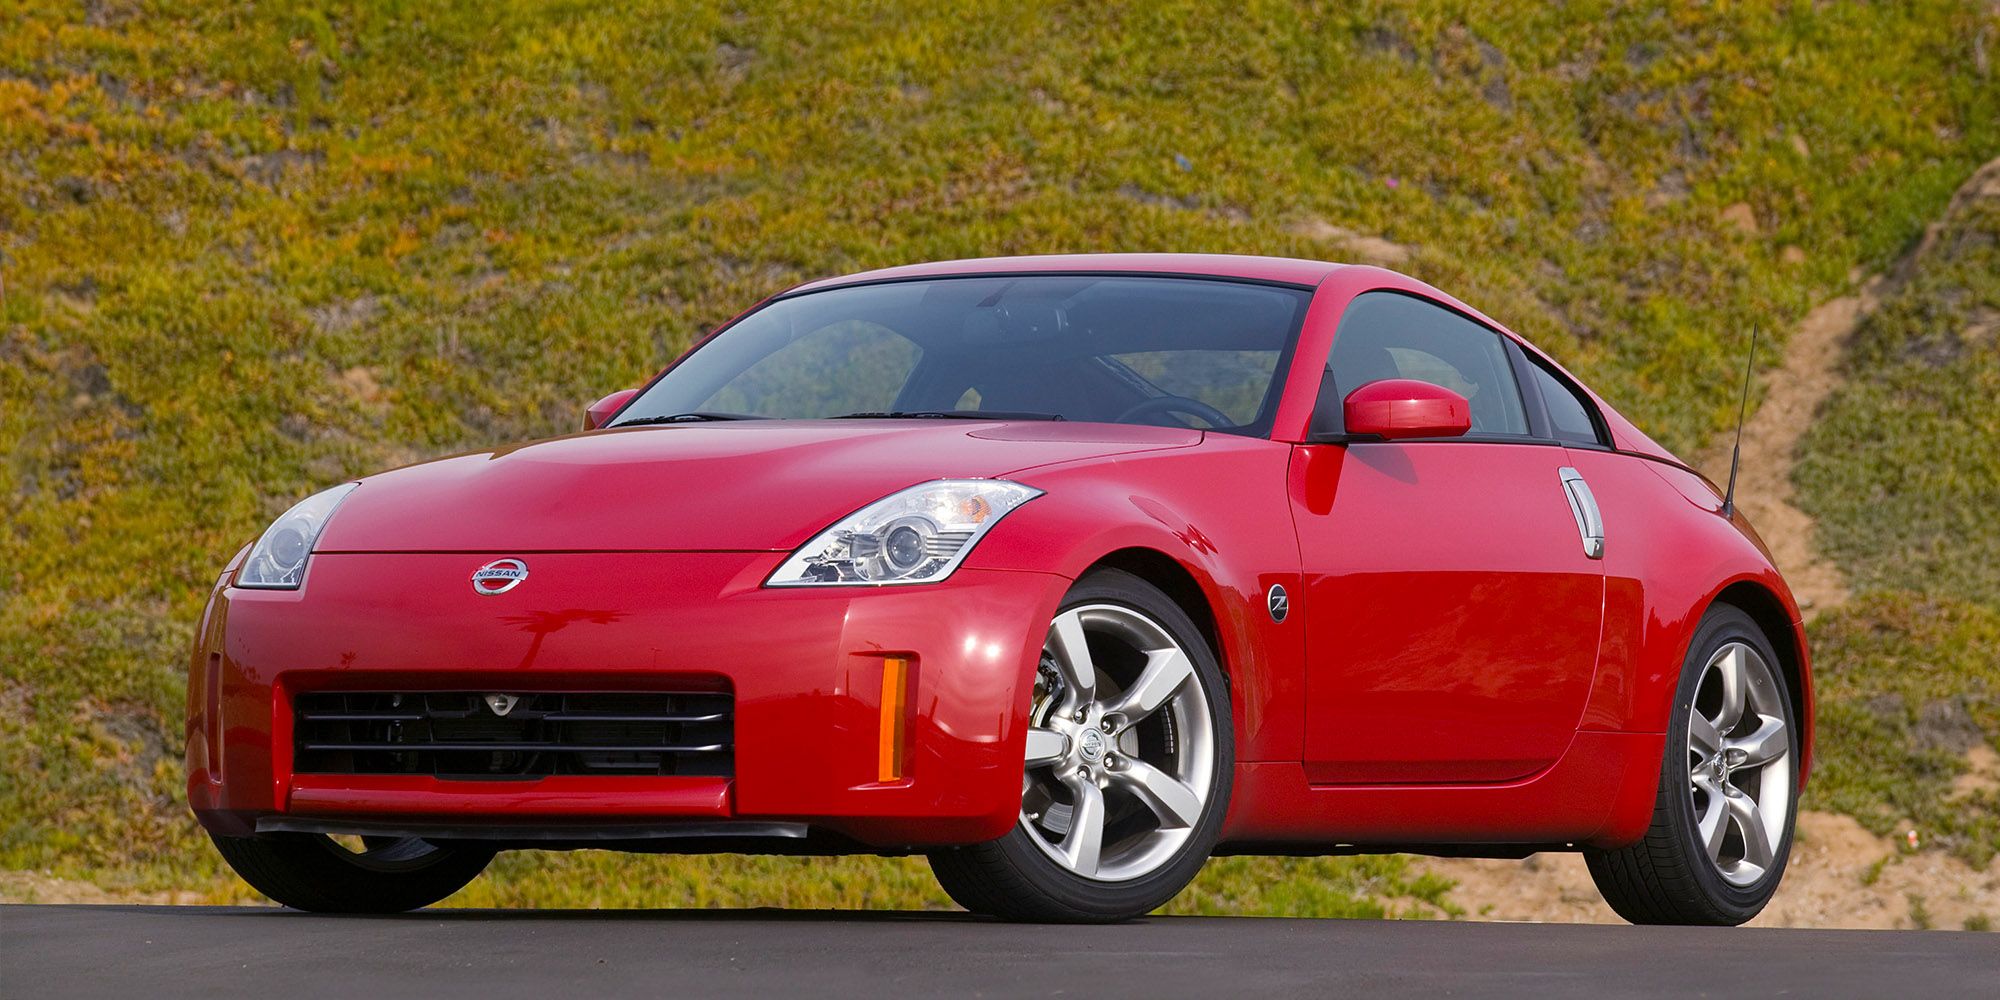 The front of the updated 350Z